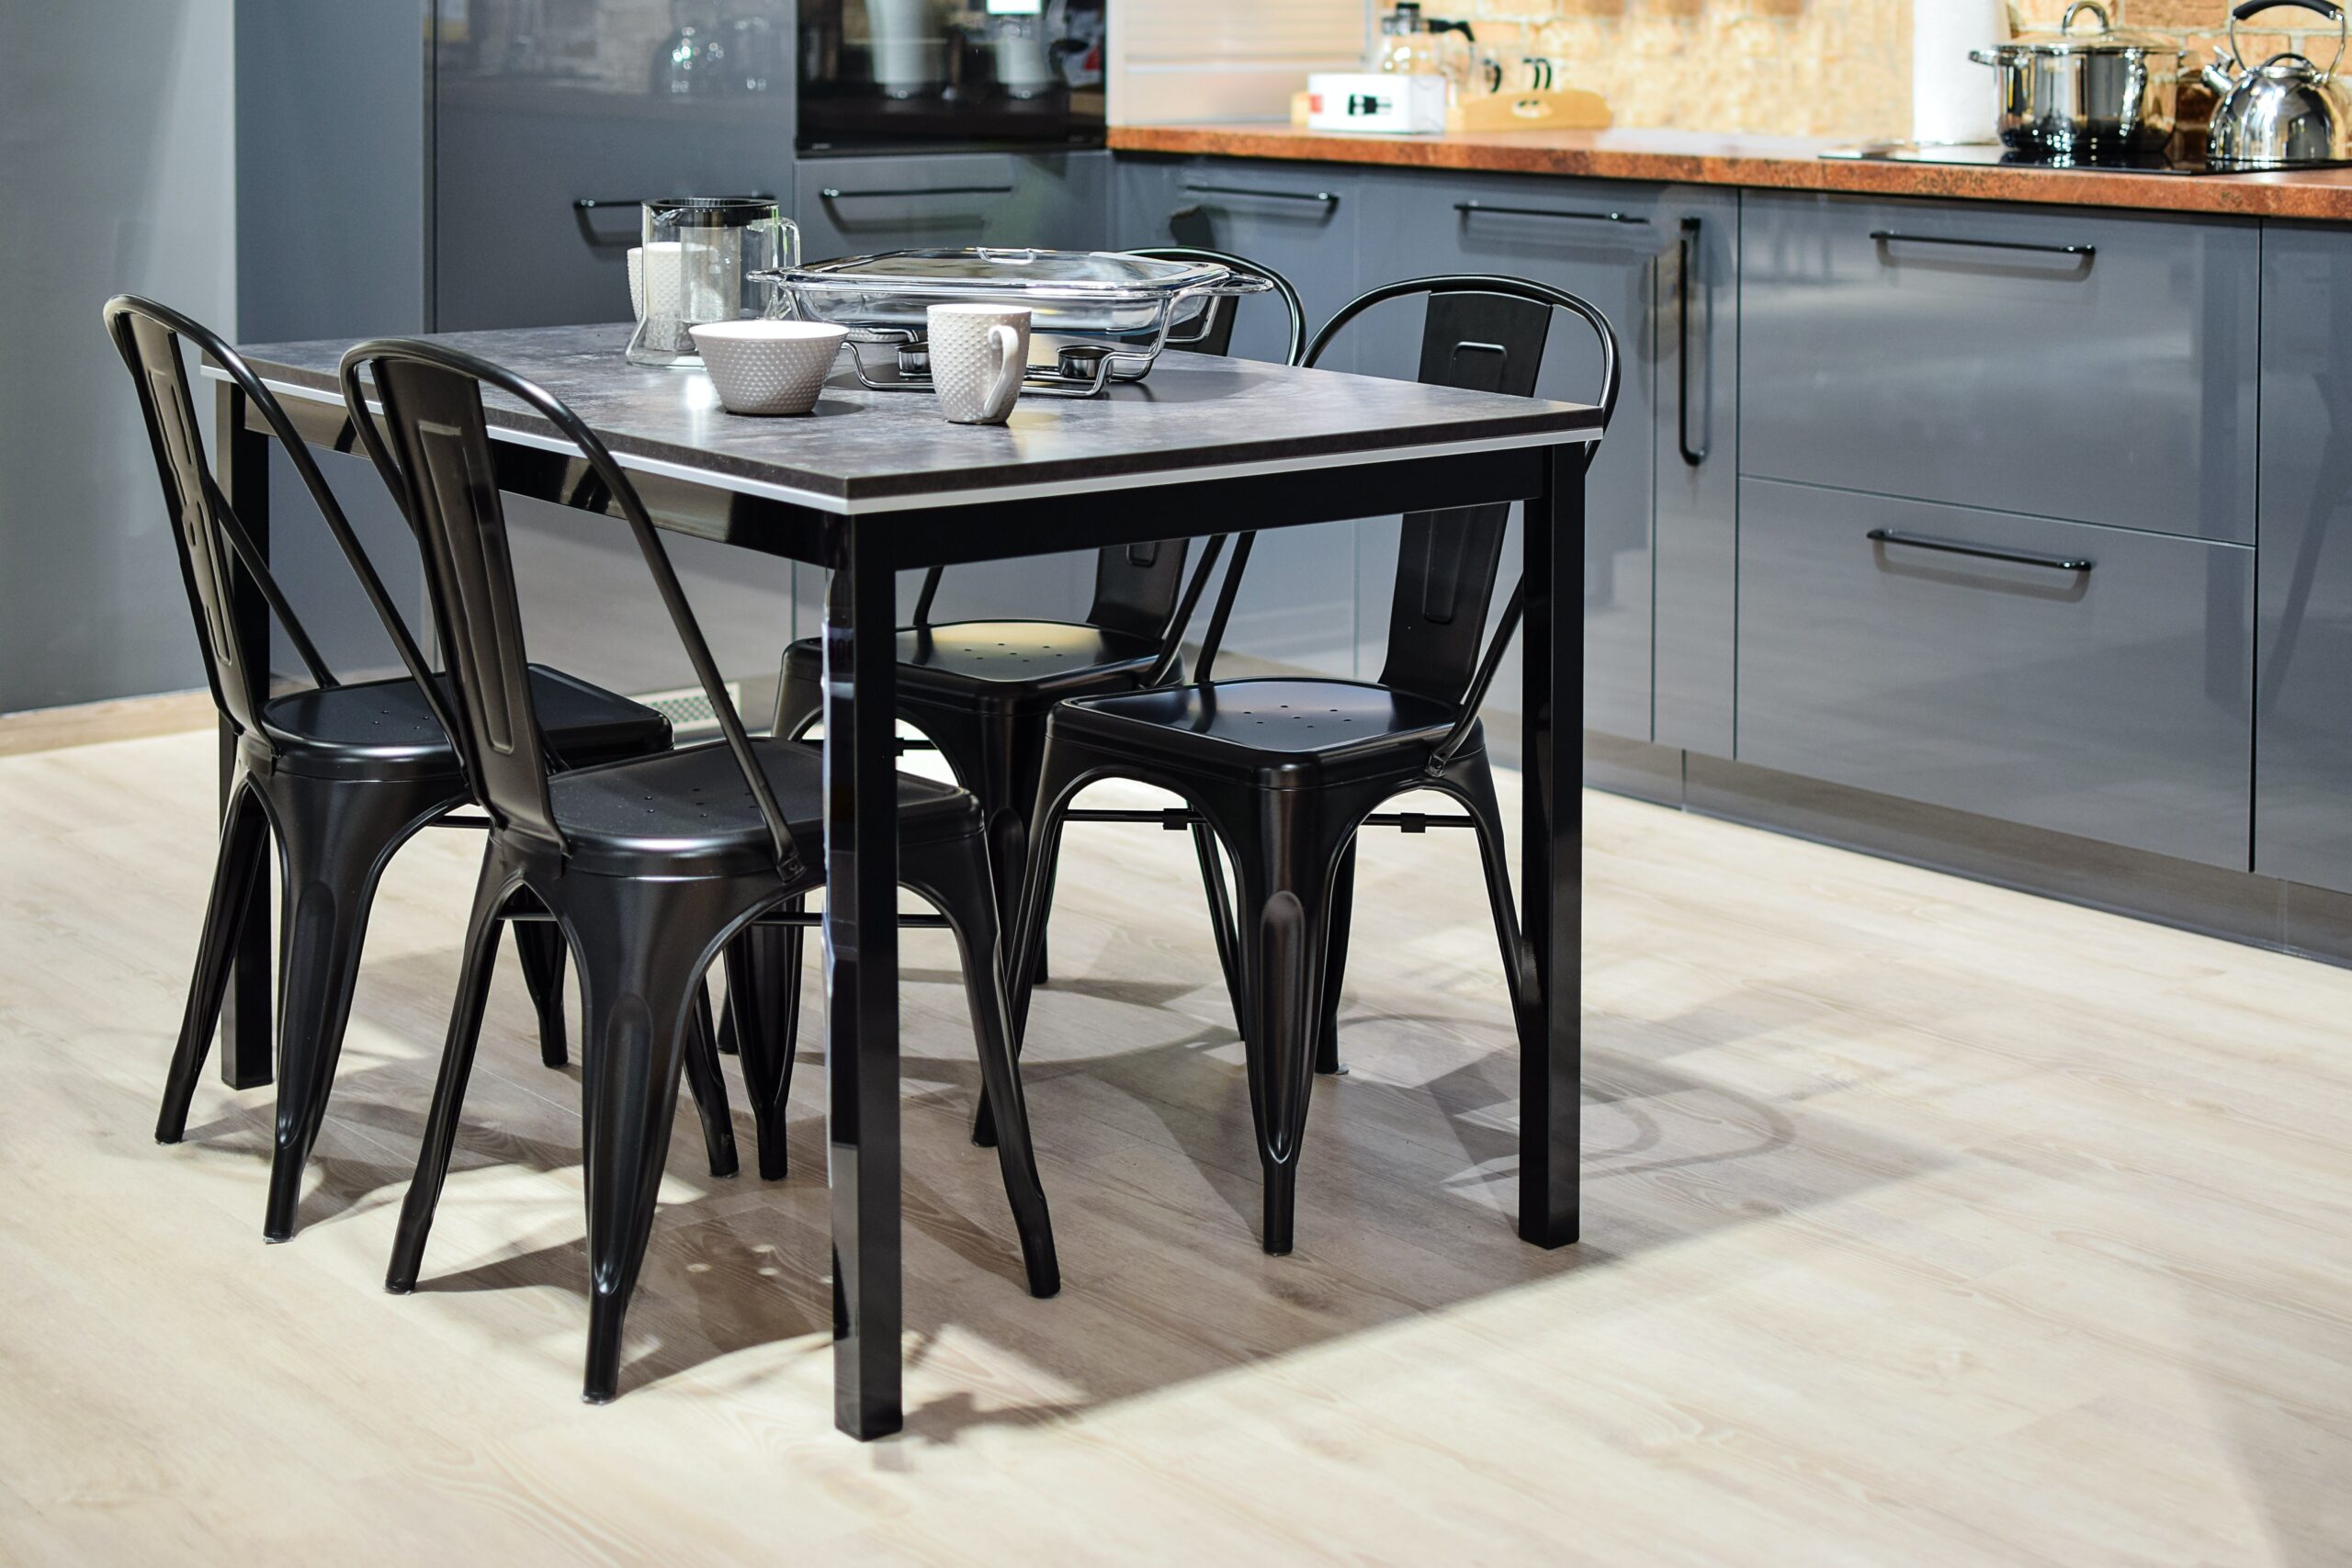 Black metal table with four chairs in kitchen